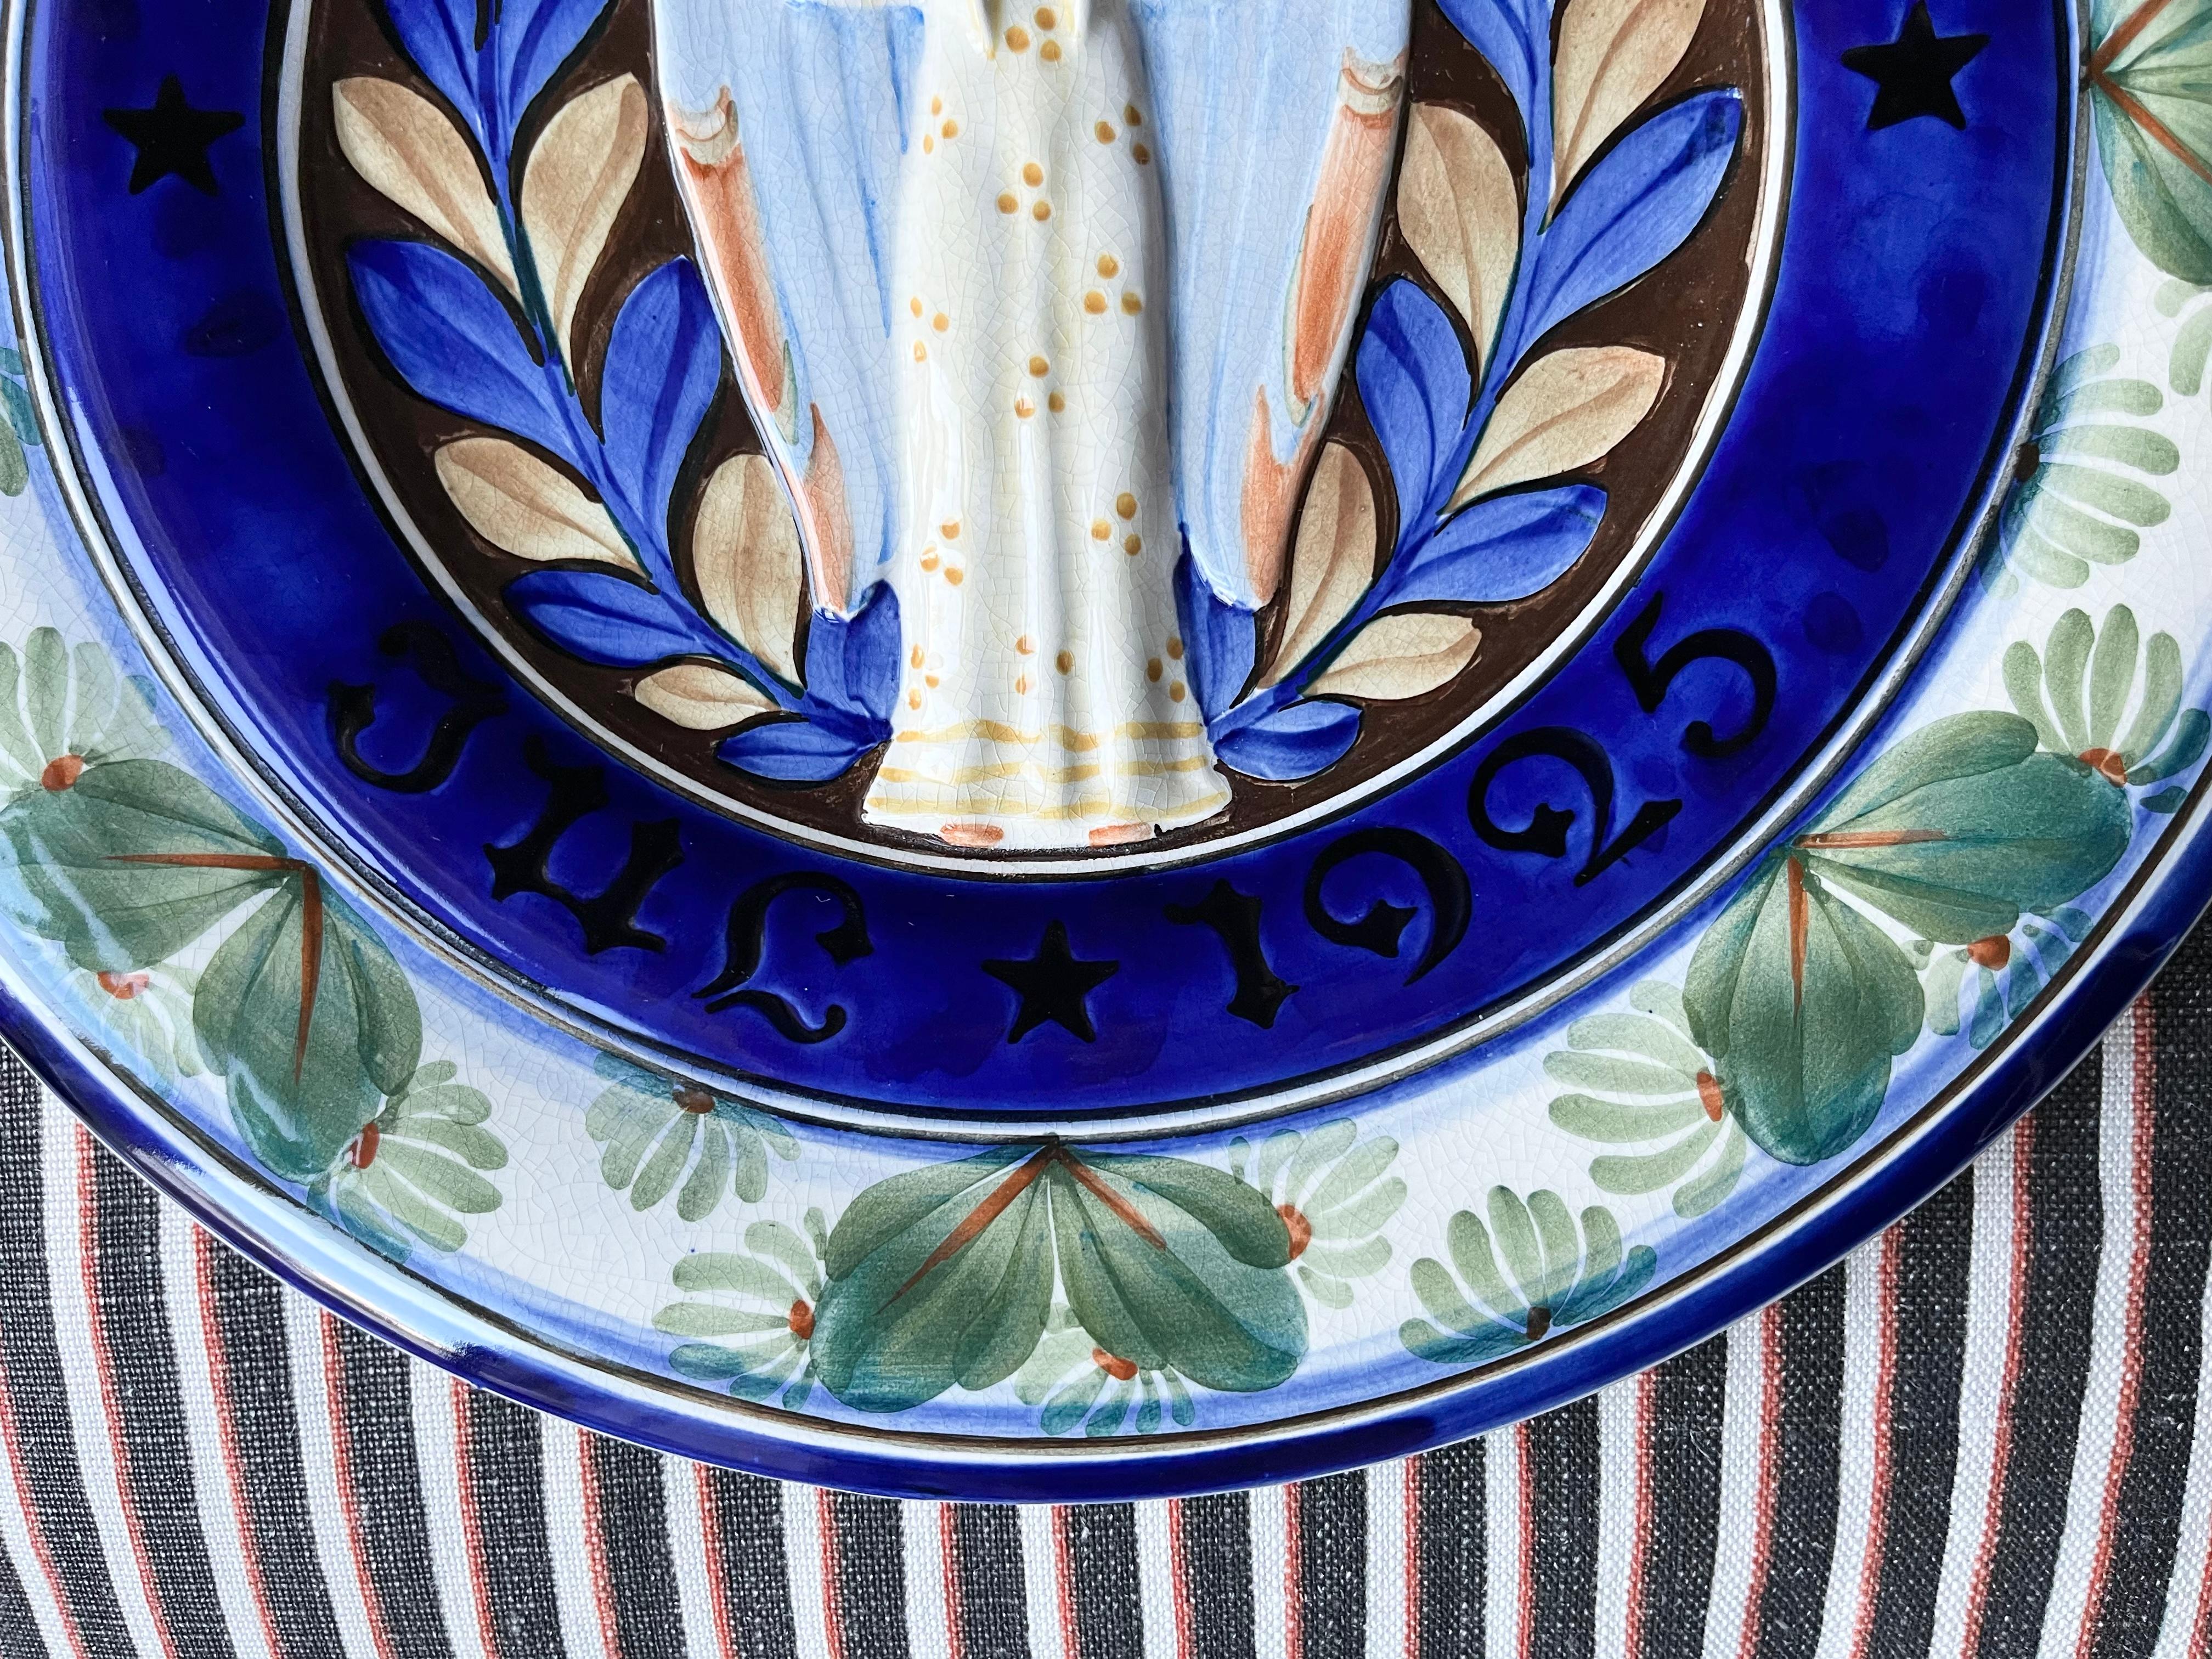 Early 20th Century Antique Christmas faience platter 1925 by Danish Aluminia hand-painted